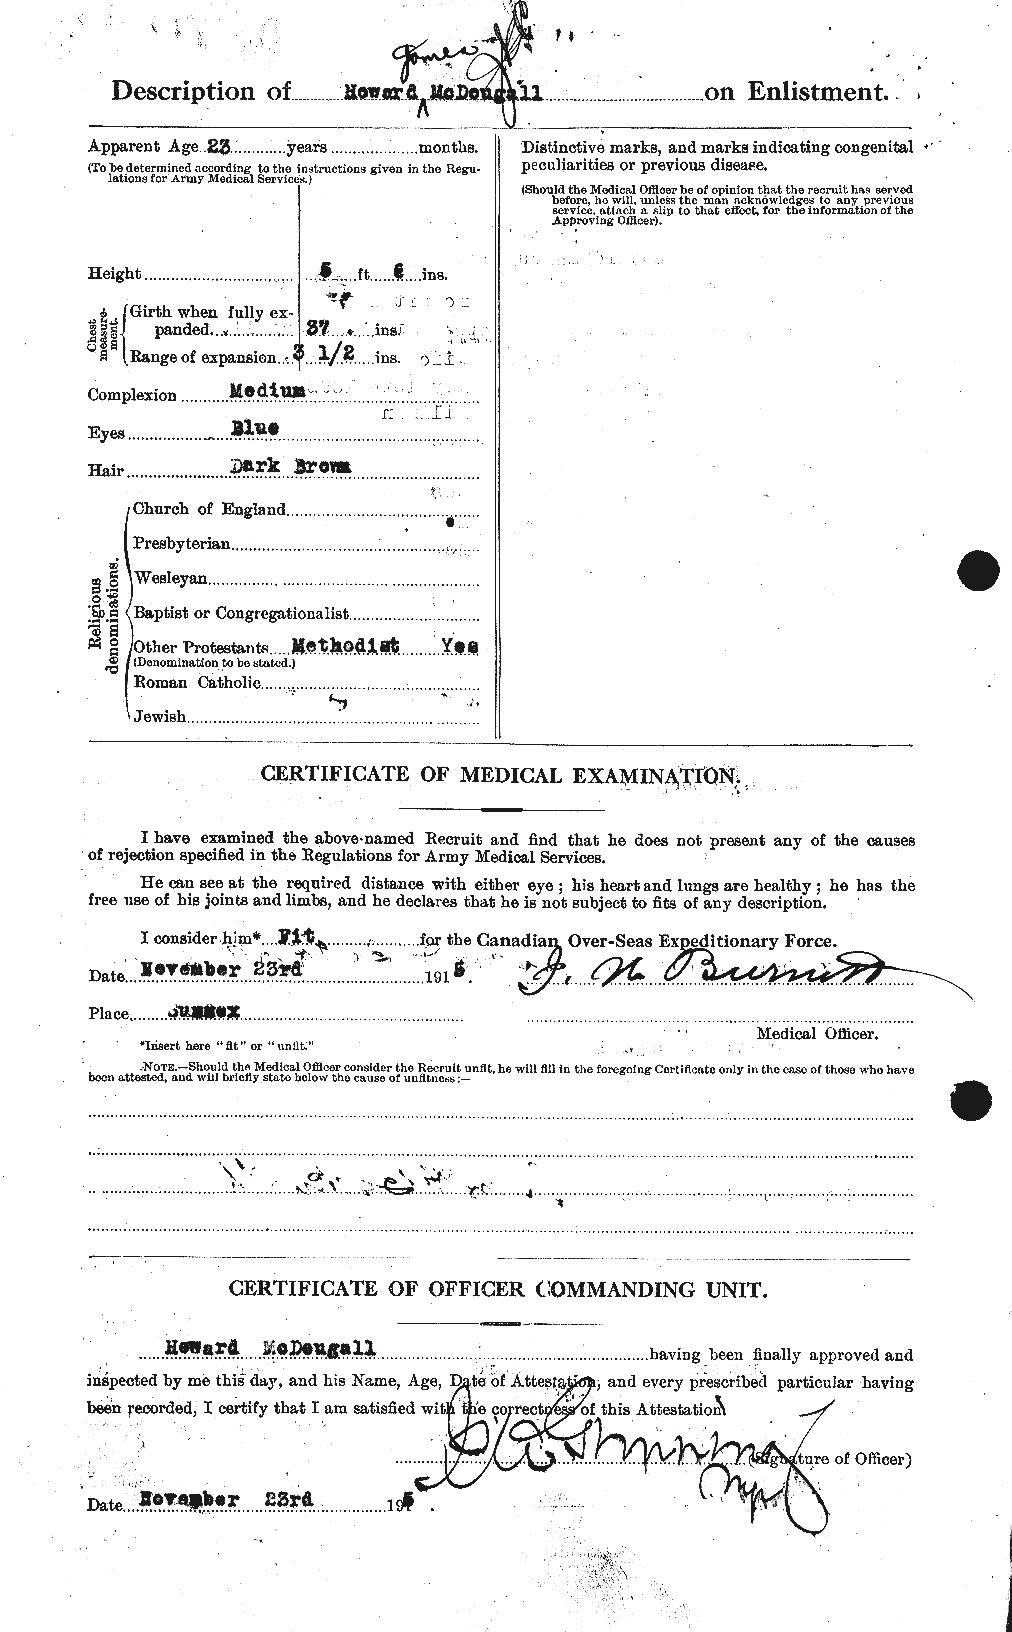 Personnel Records of the First World War - CEF 518157b